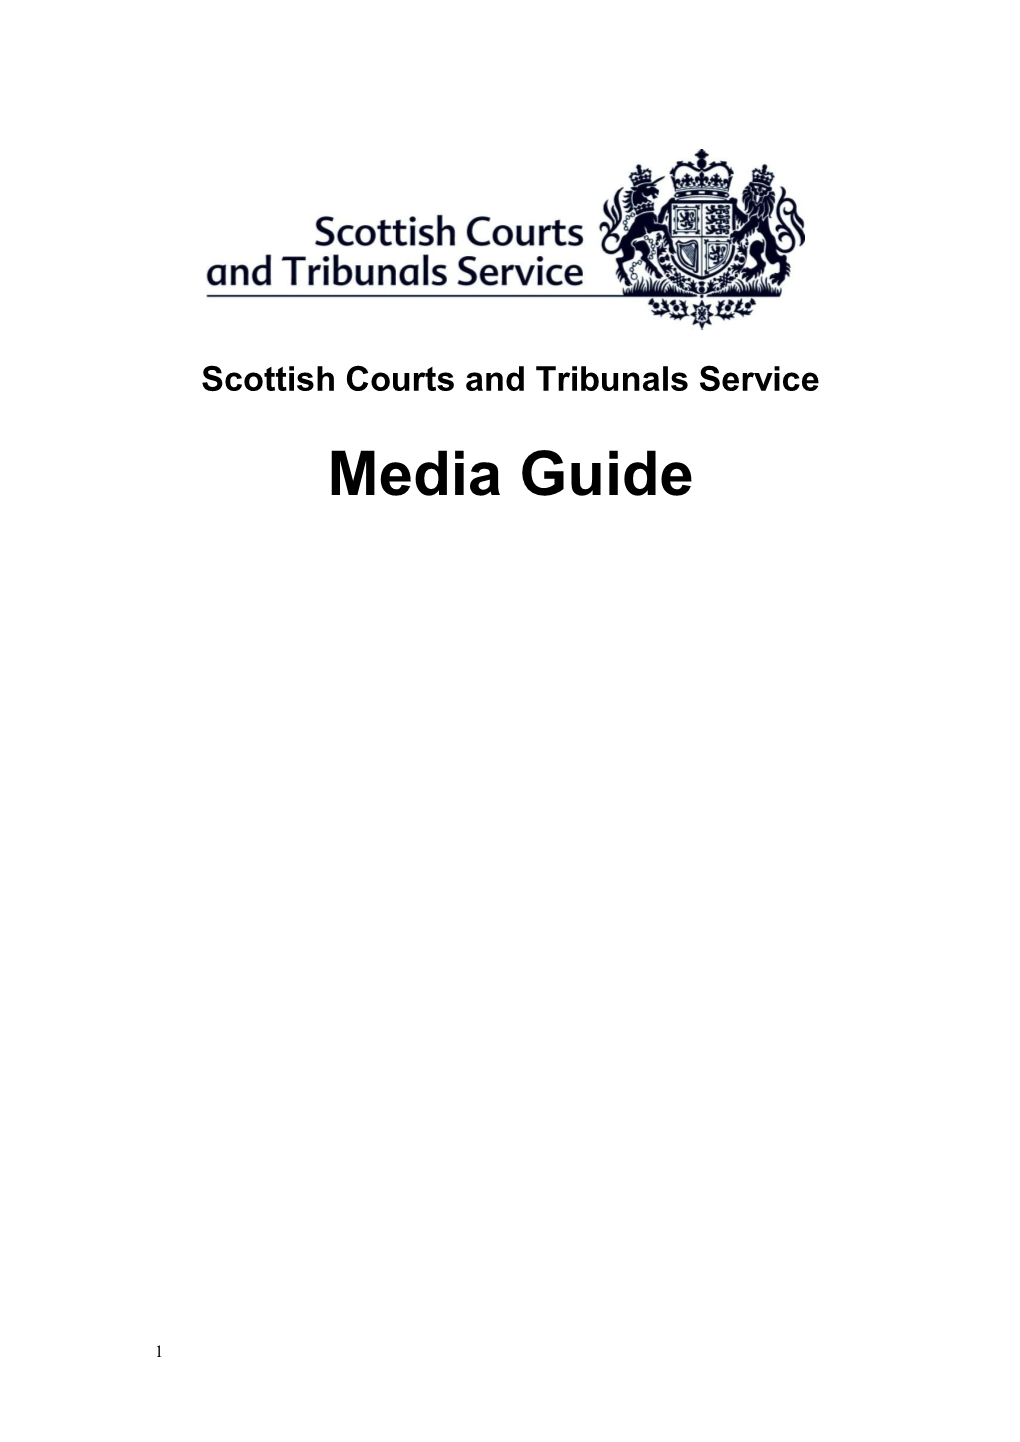 SCTS Media Guide